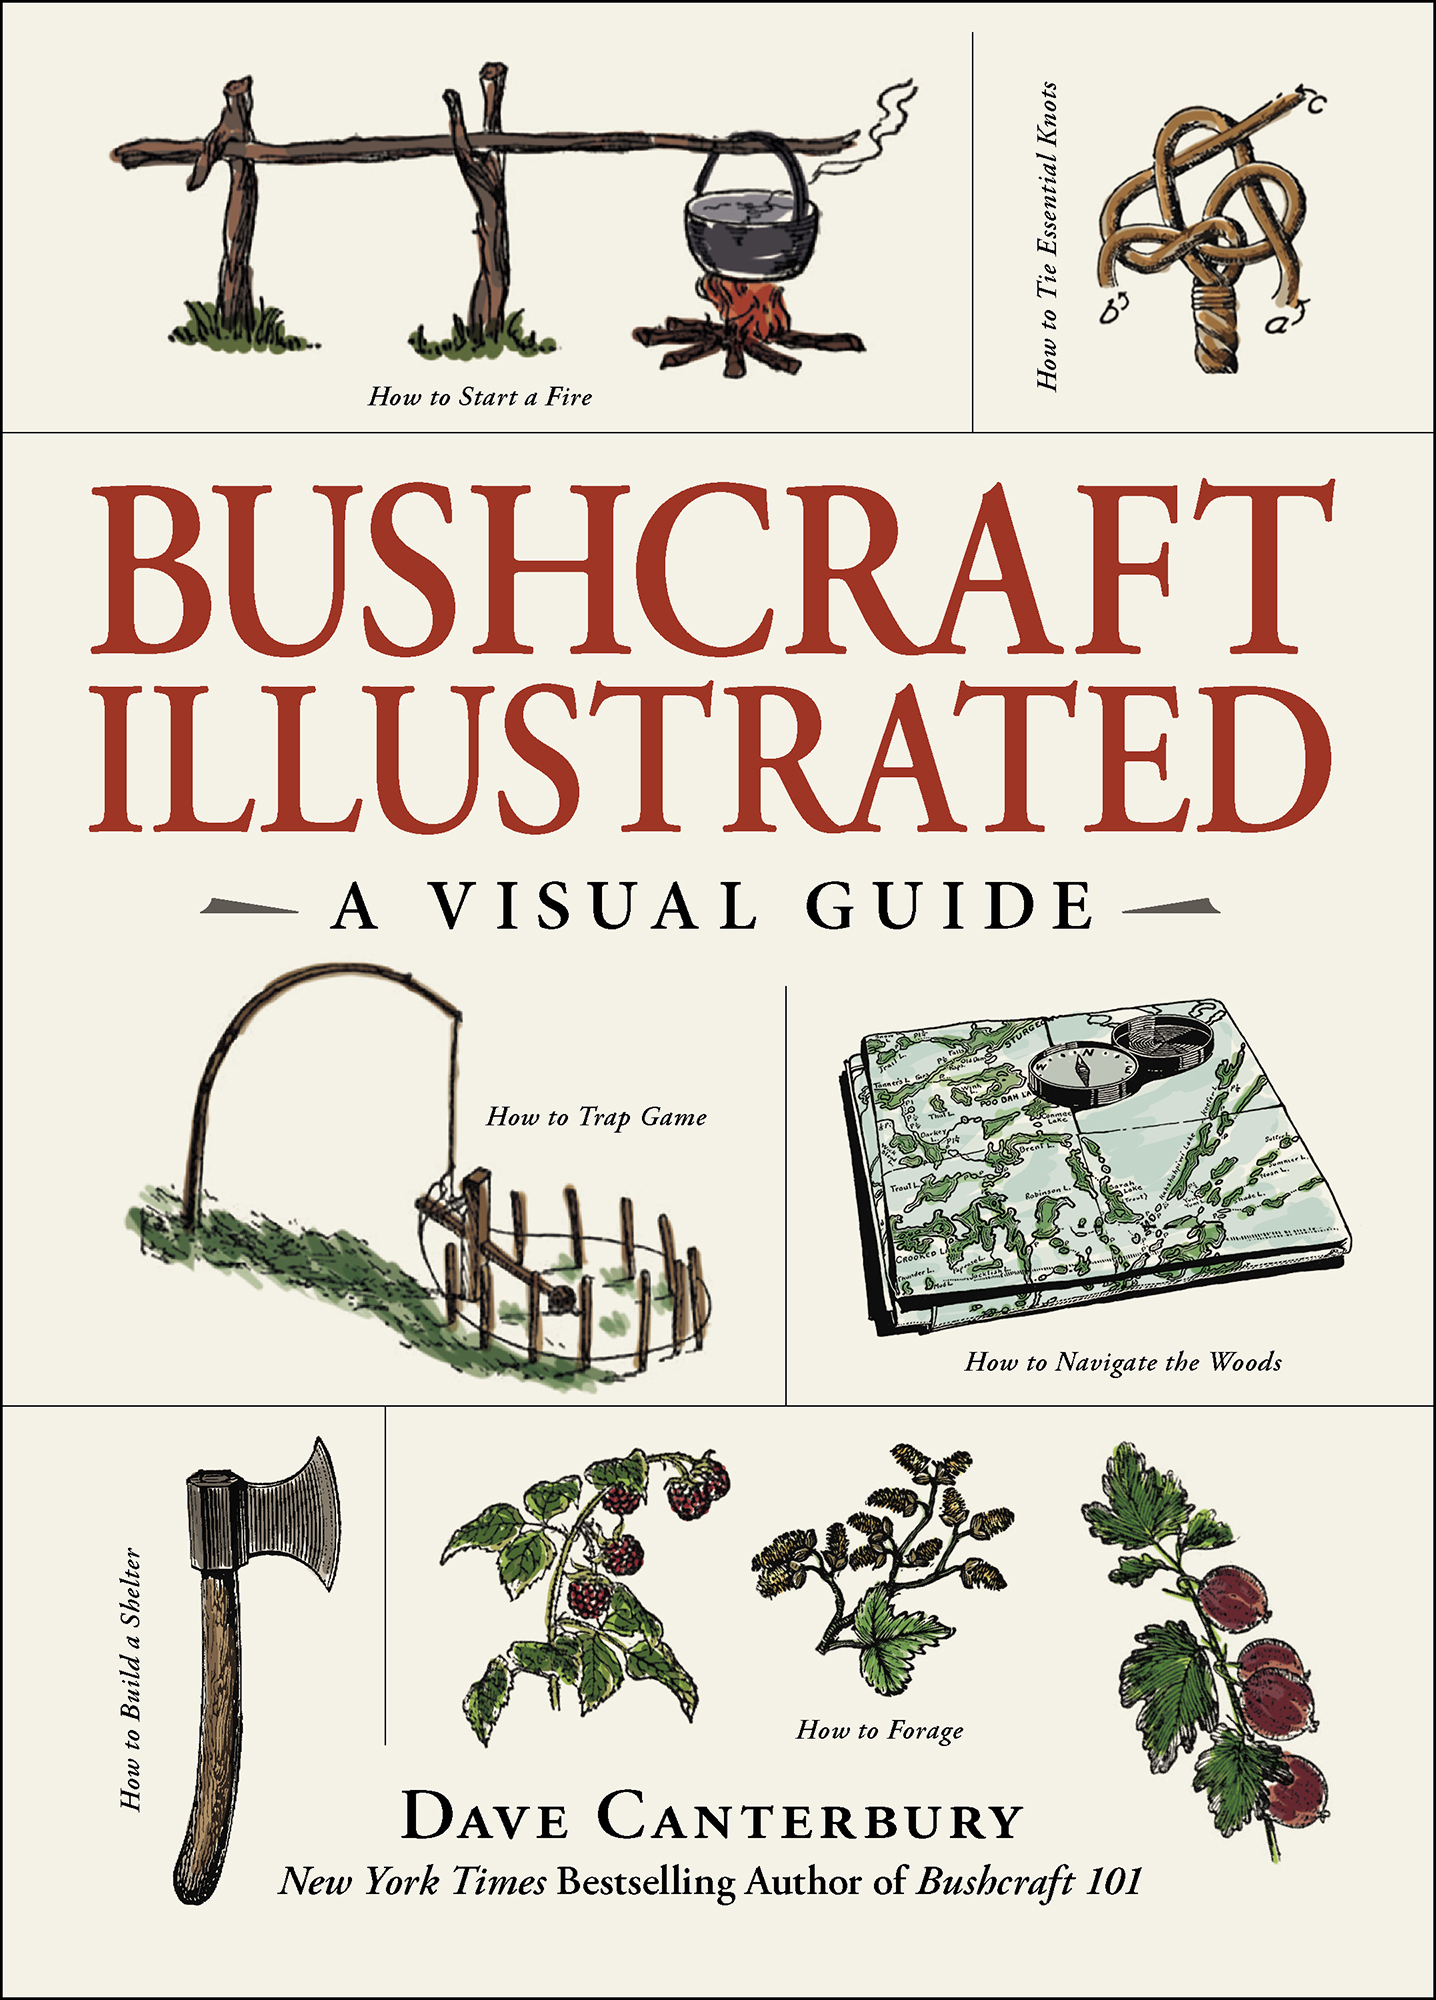 Bushcraft illustrated a visual guide - image 1